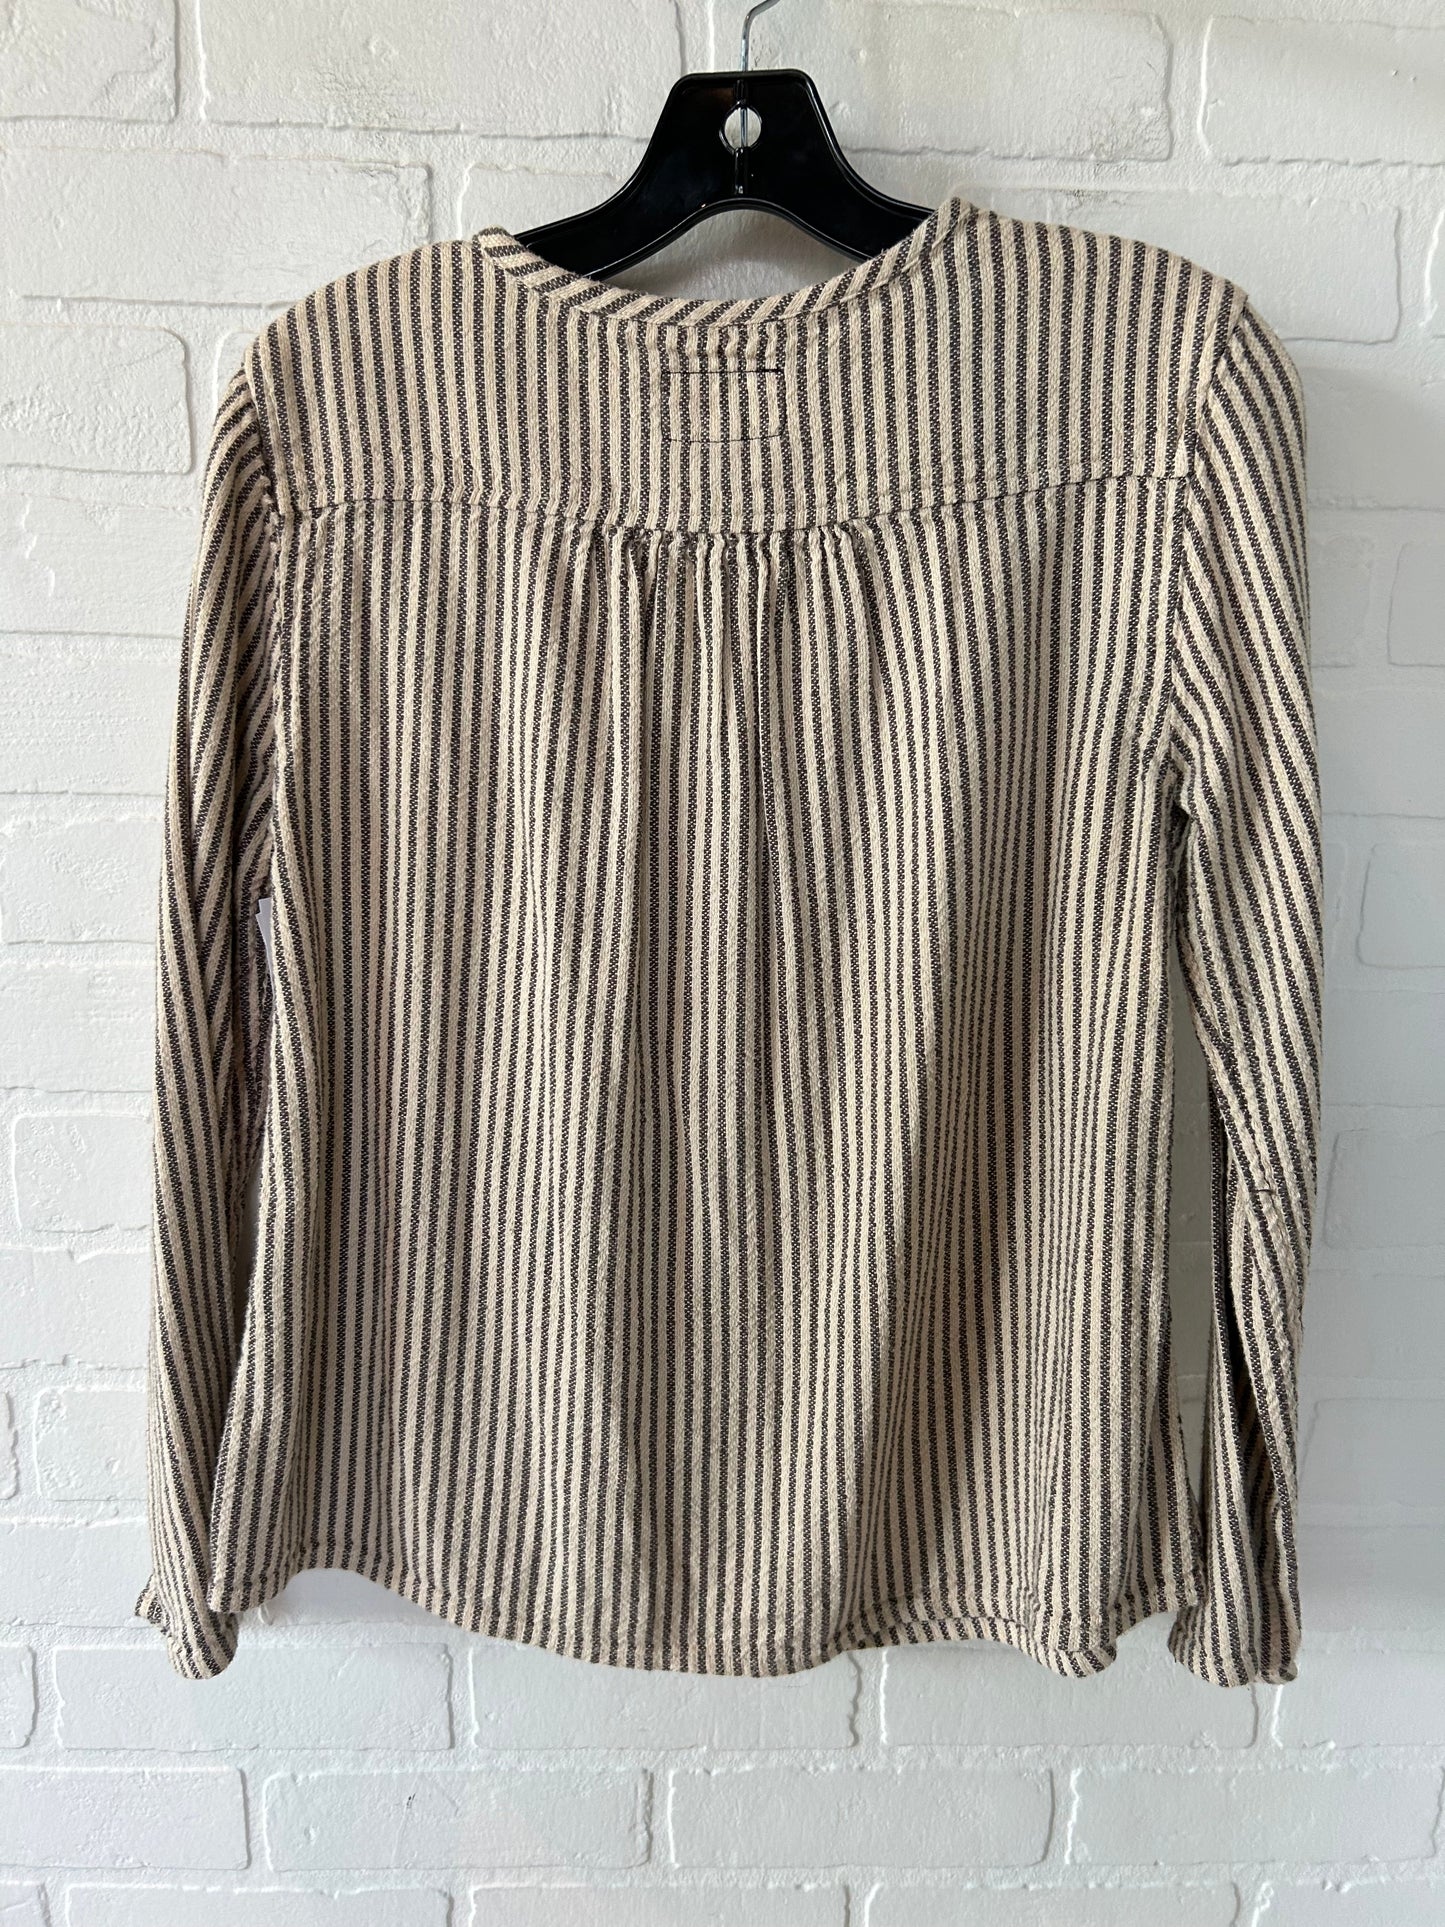 Brown Top Long Sleeve Current/elliott, Size Xs